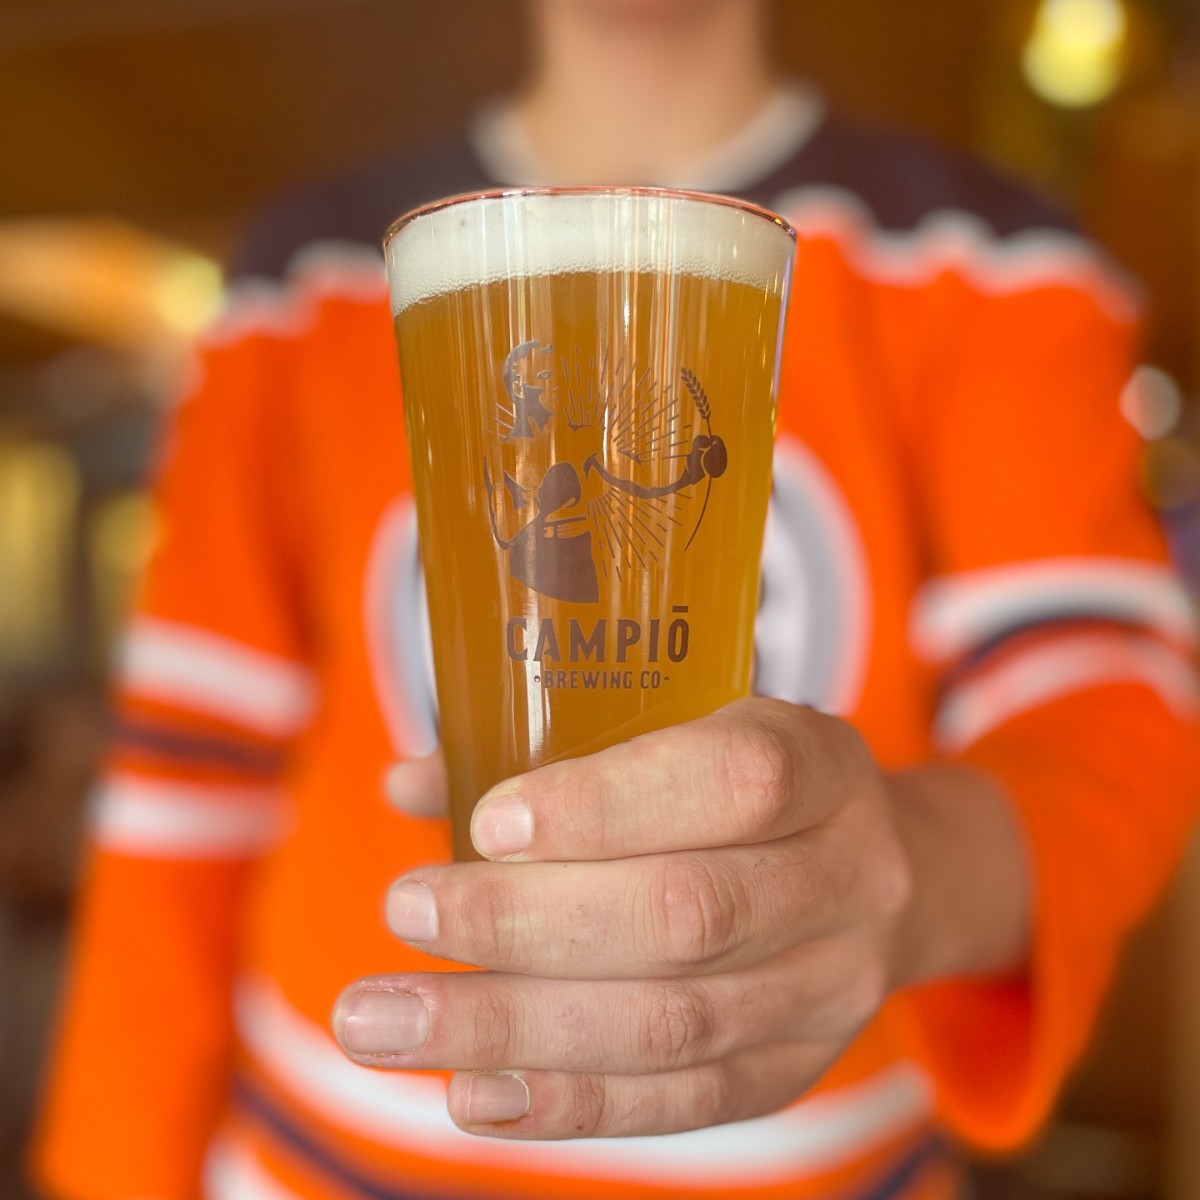 Tonight's the night! Come down to the brewpub and cheer on the boys with an Ooh La La Bamba French Blanche! 🍻💙🧡